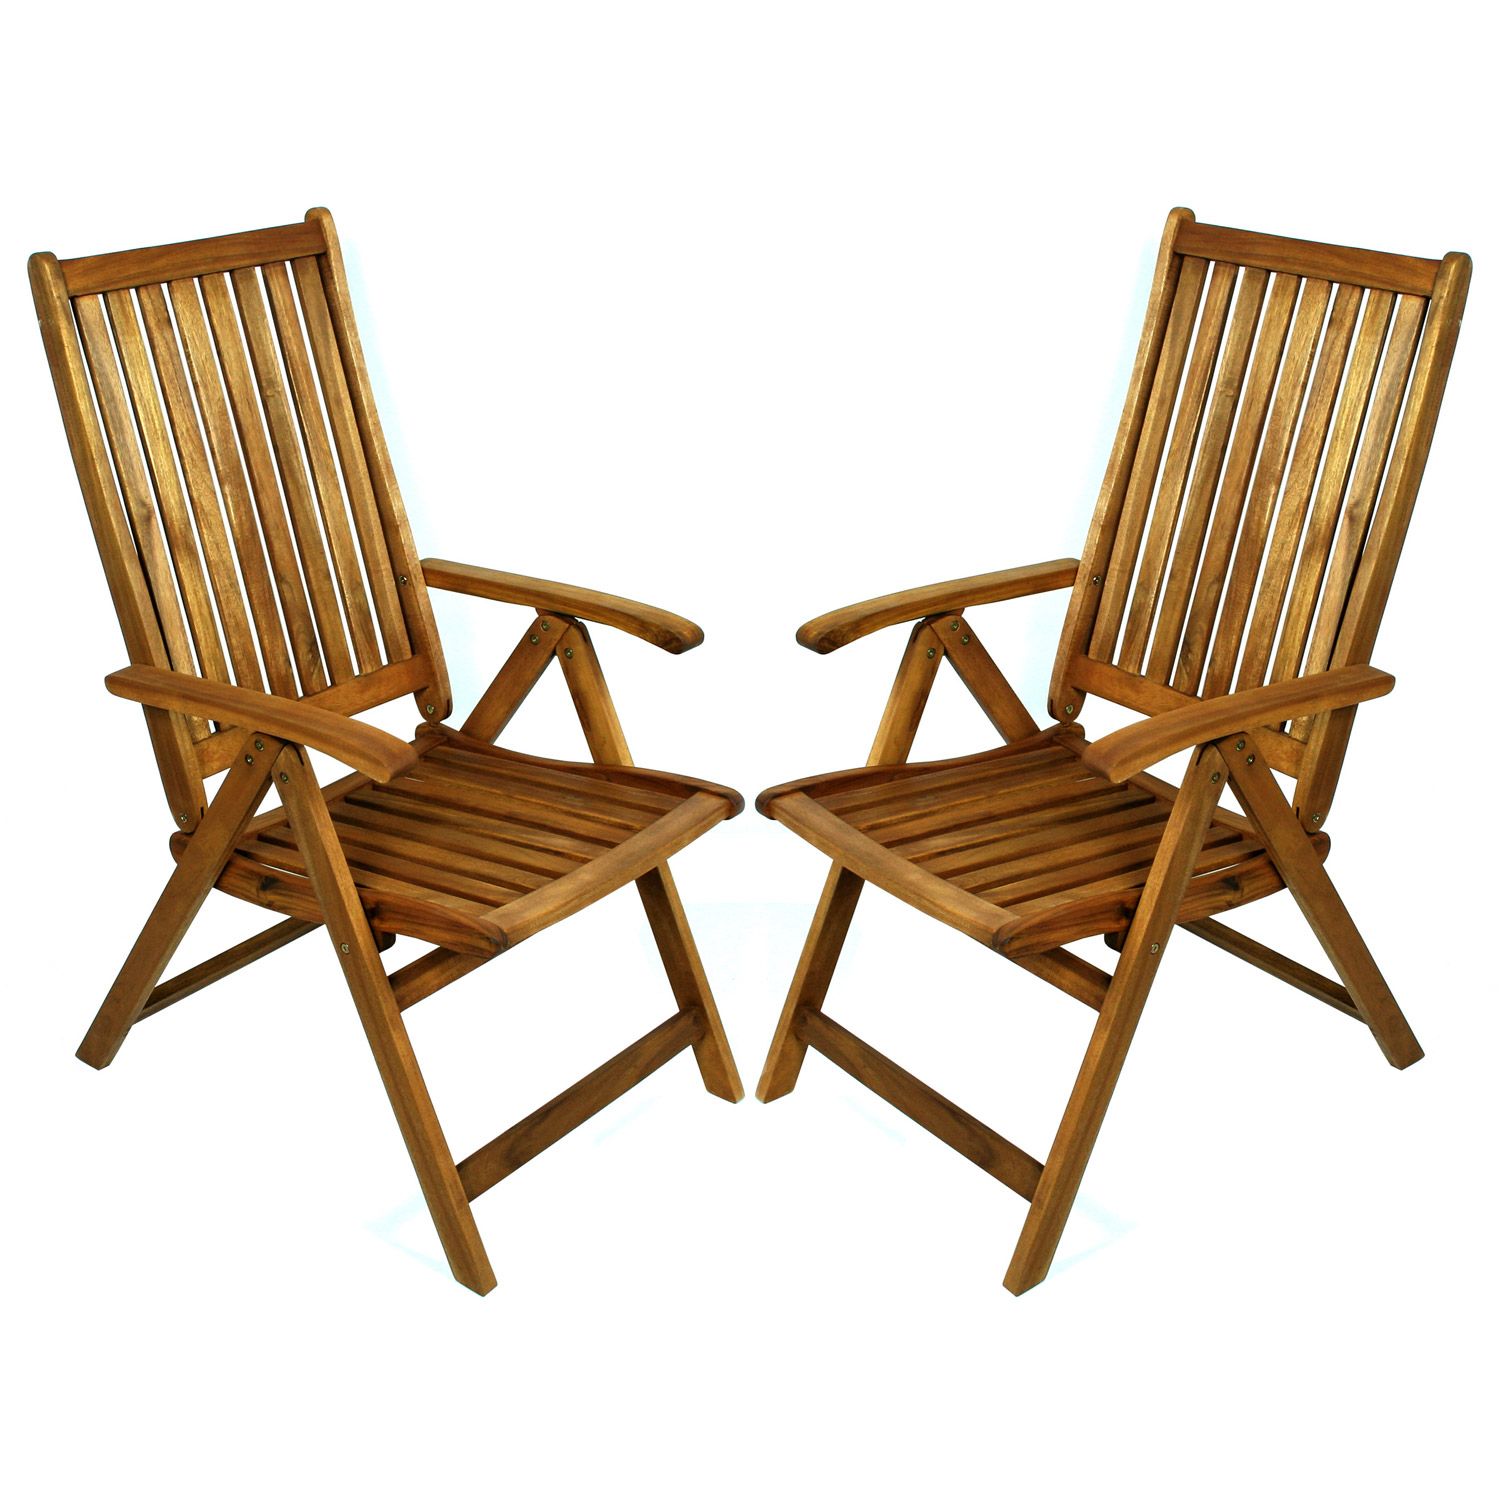  Cottage Gardens Acacia 5 Position Folding Patio Chair 2 Pack